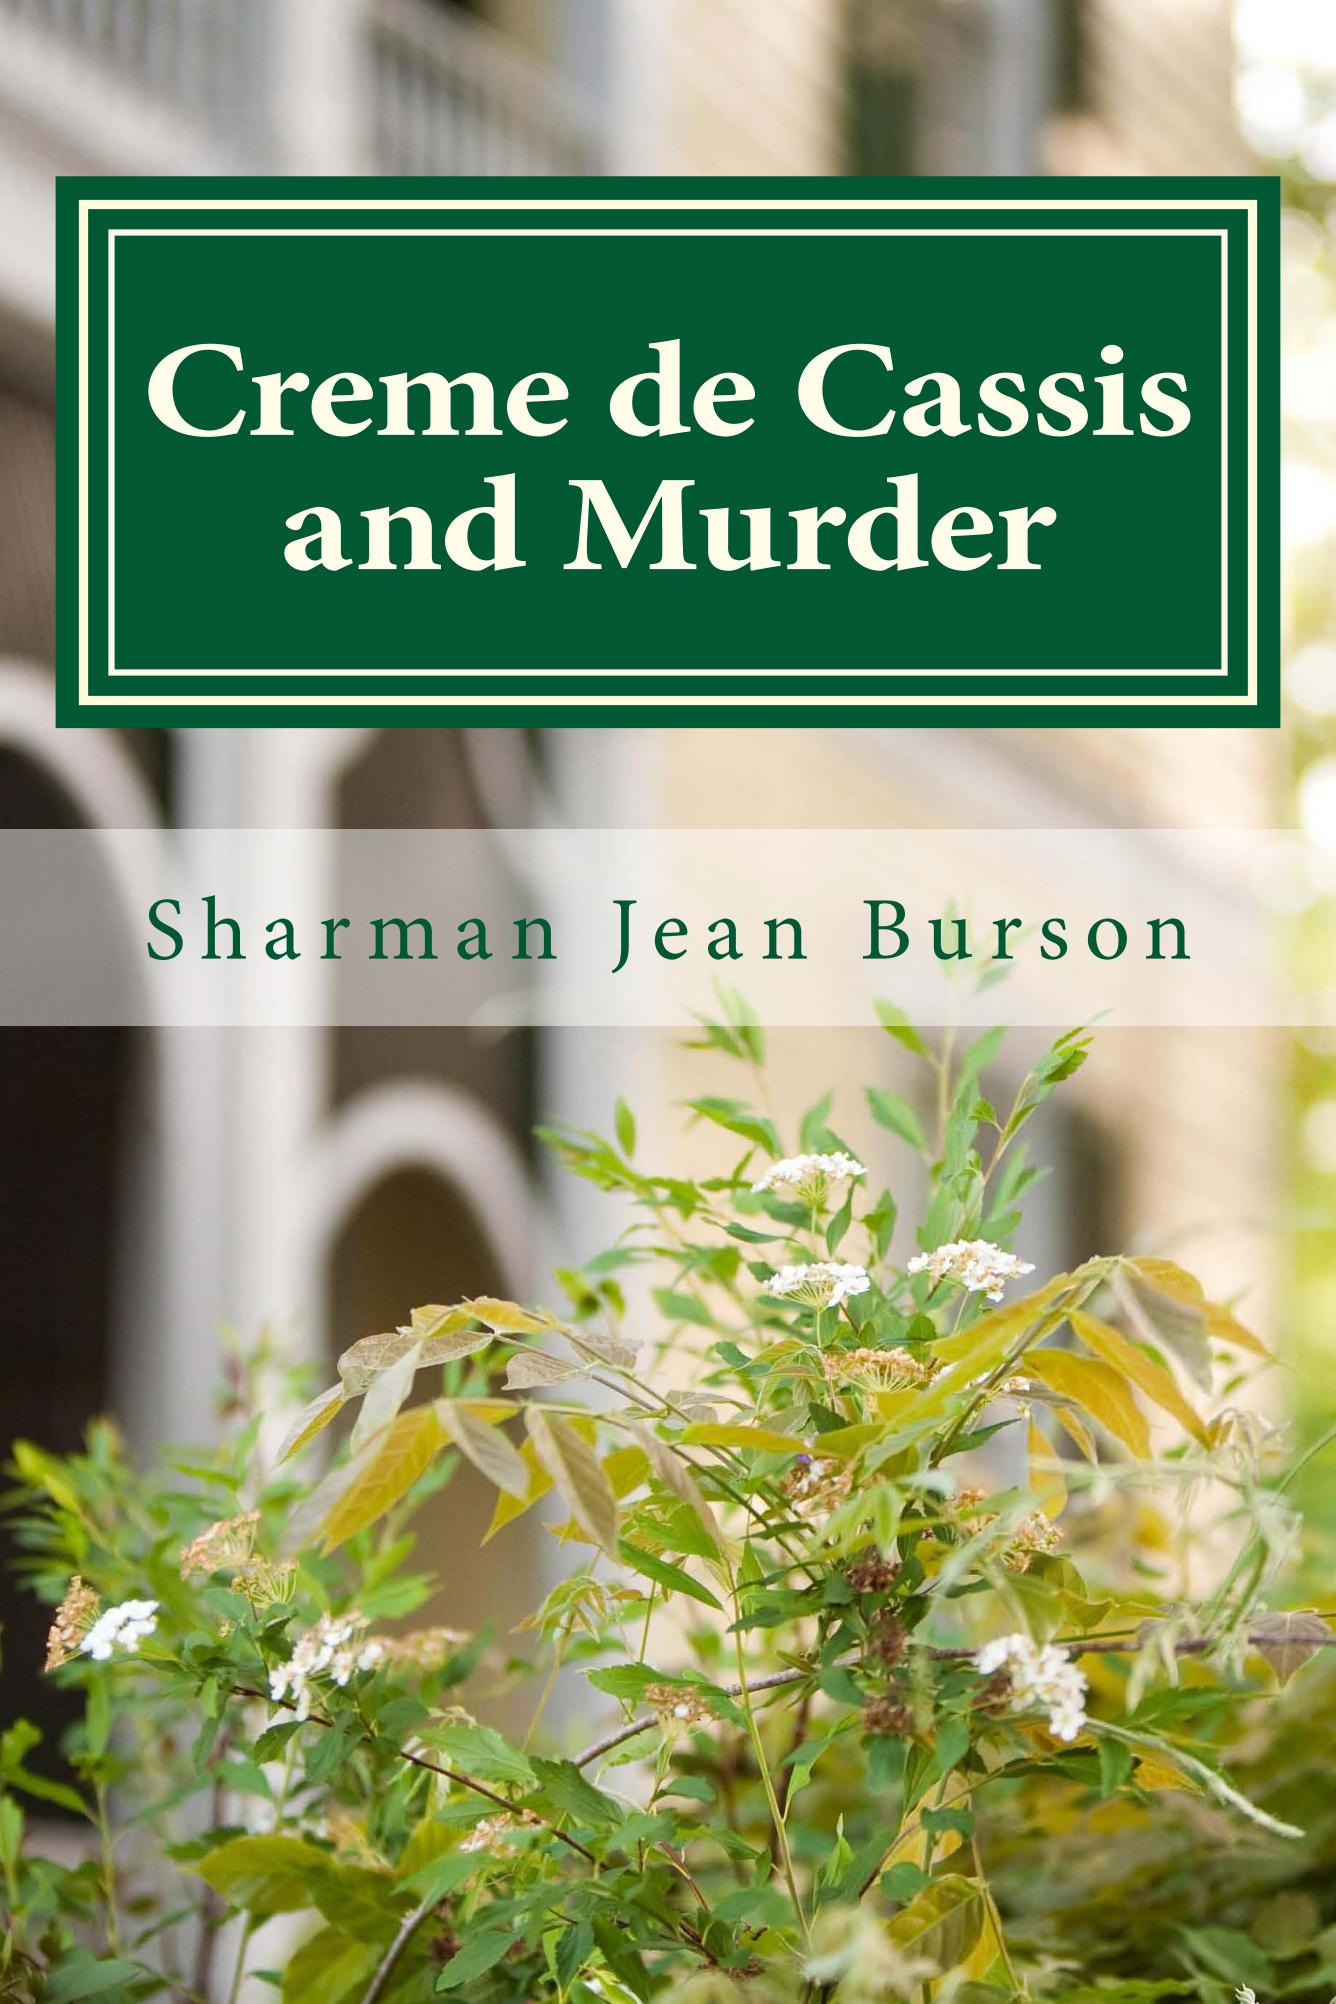 Creme de Cassis and Murder